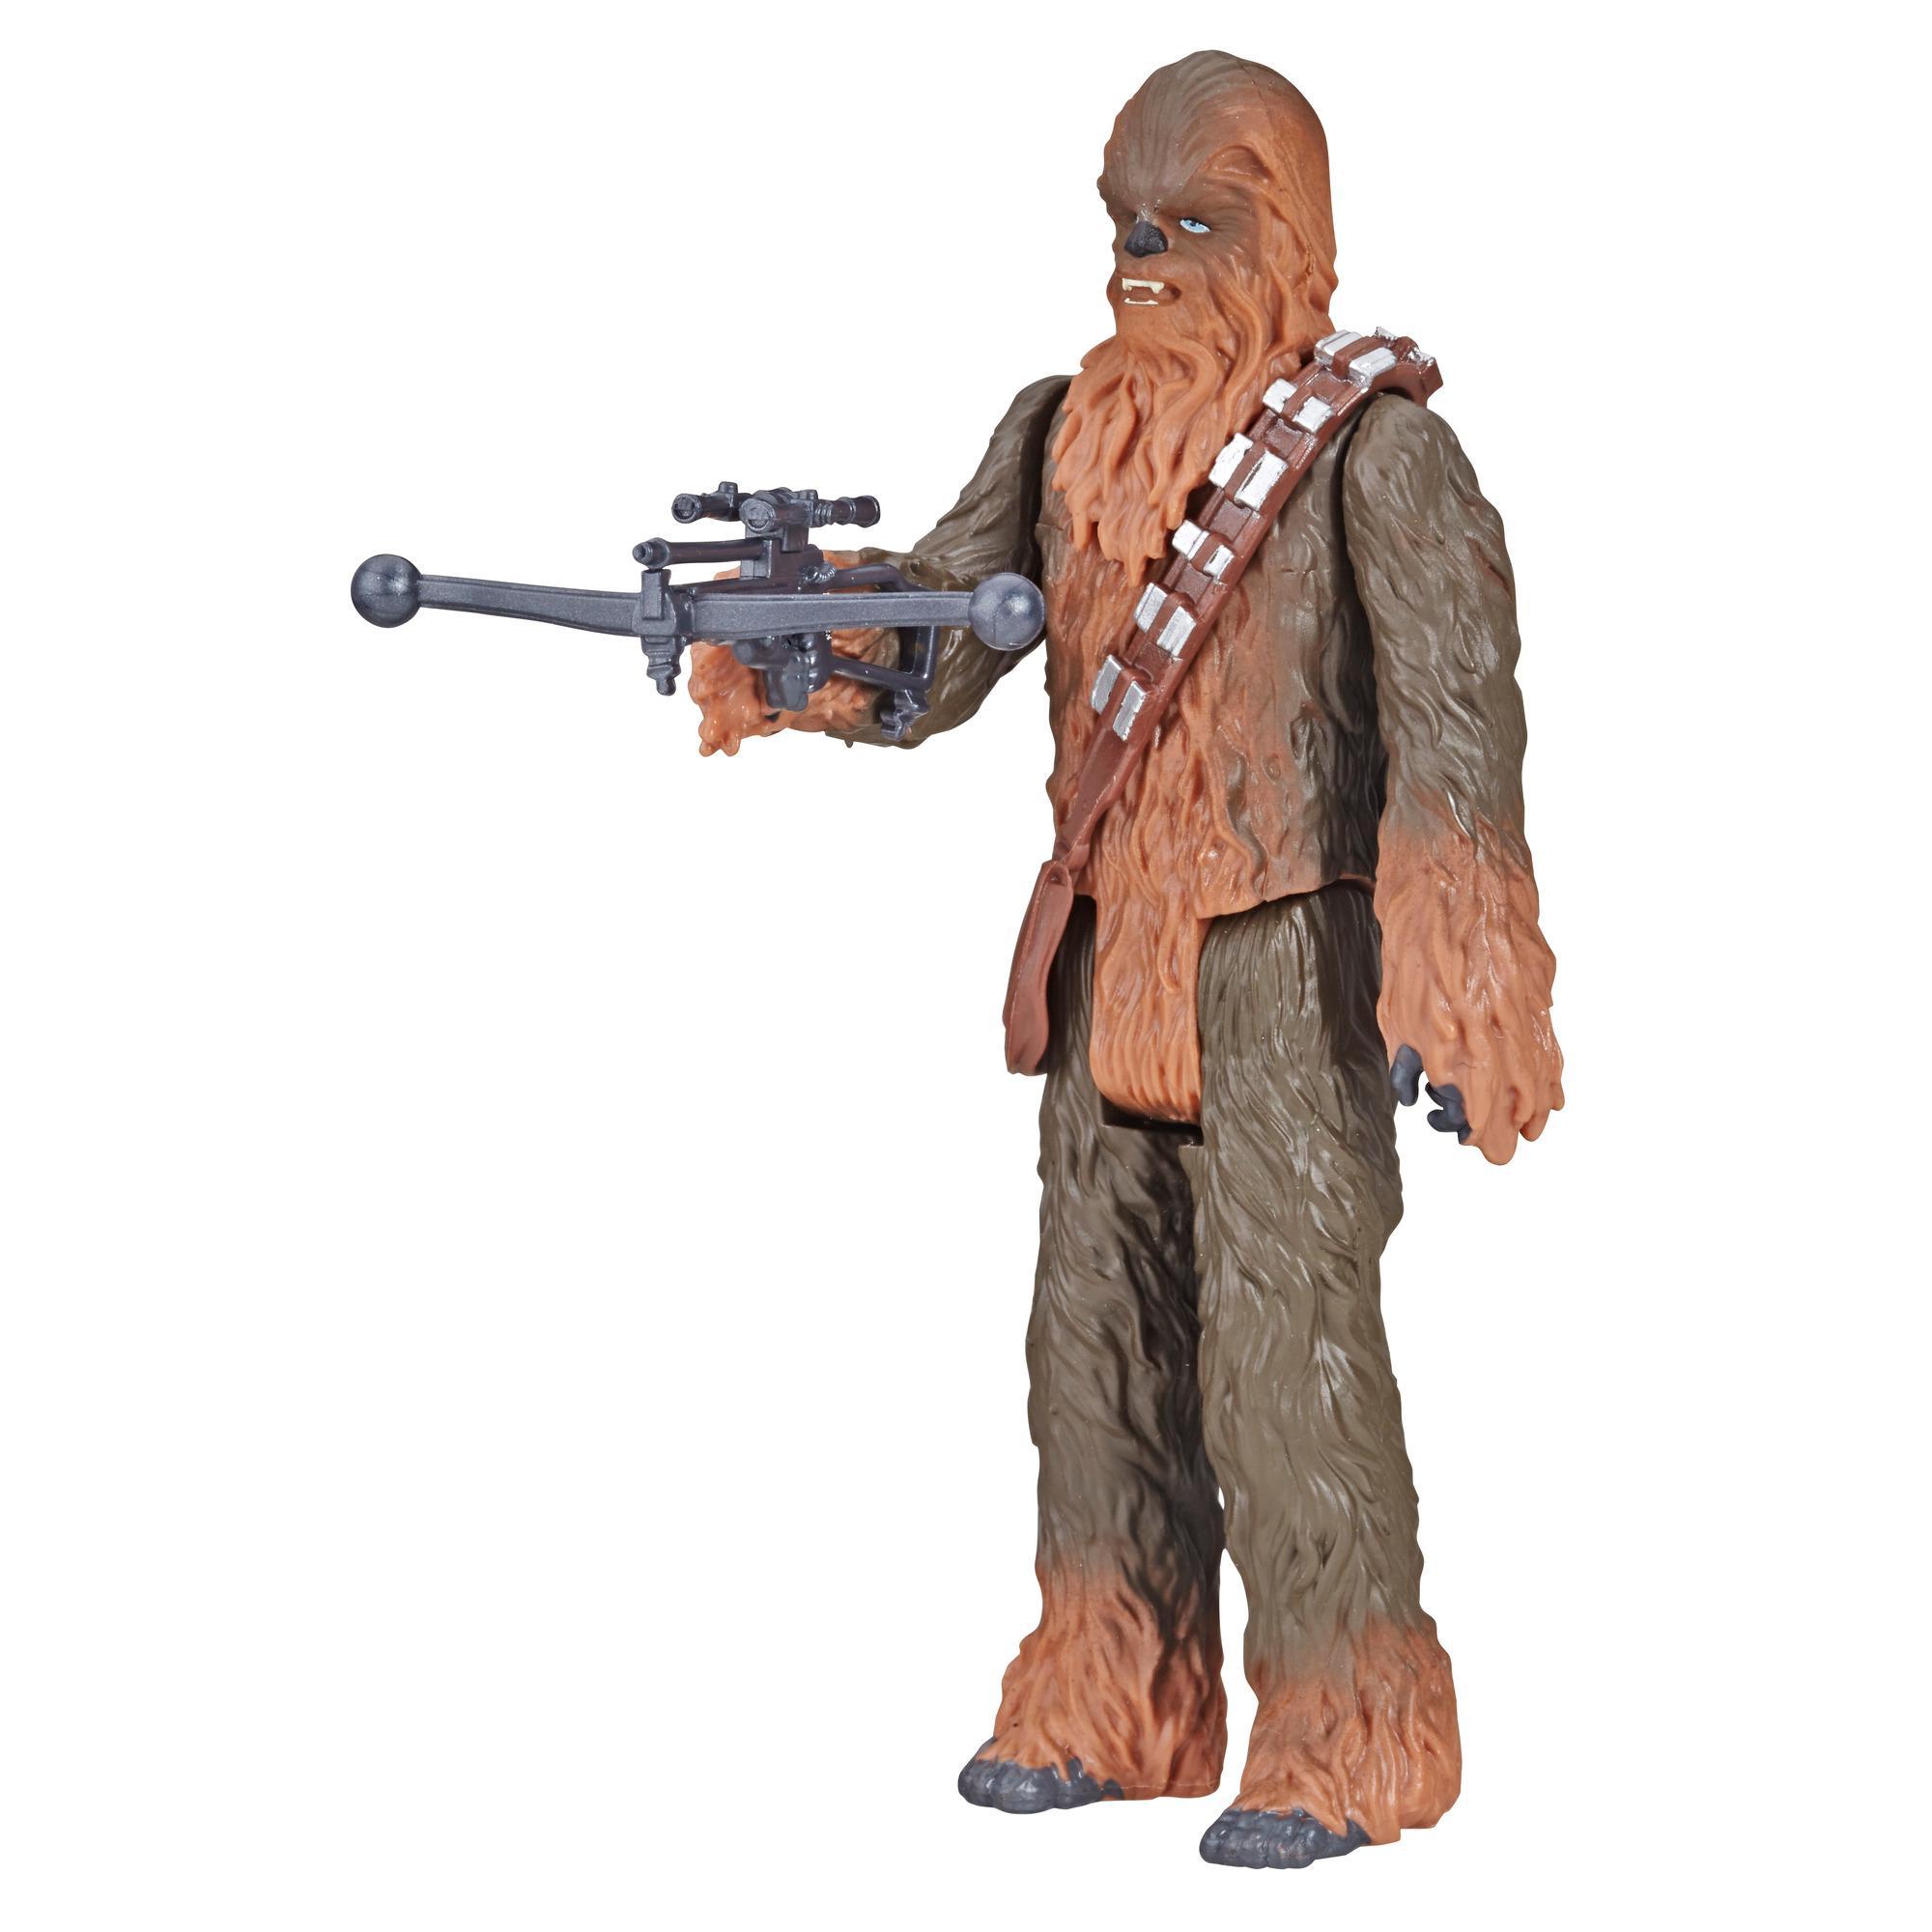 Star Wars Galaxy of Adventures Chewbacca Figure and Mini Comic product thumbnail 1